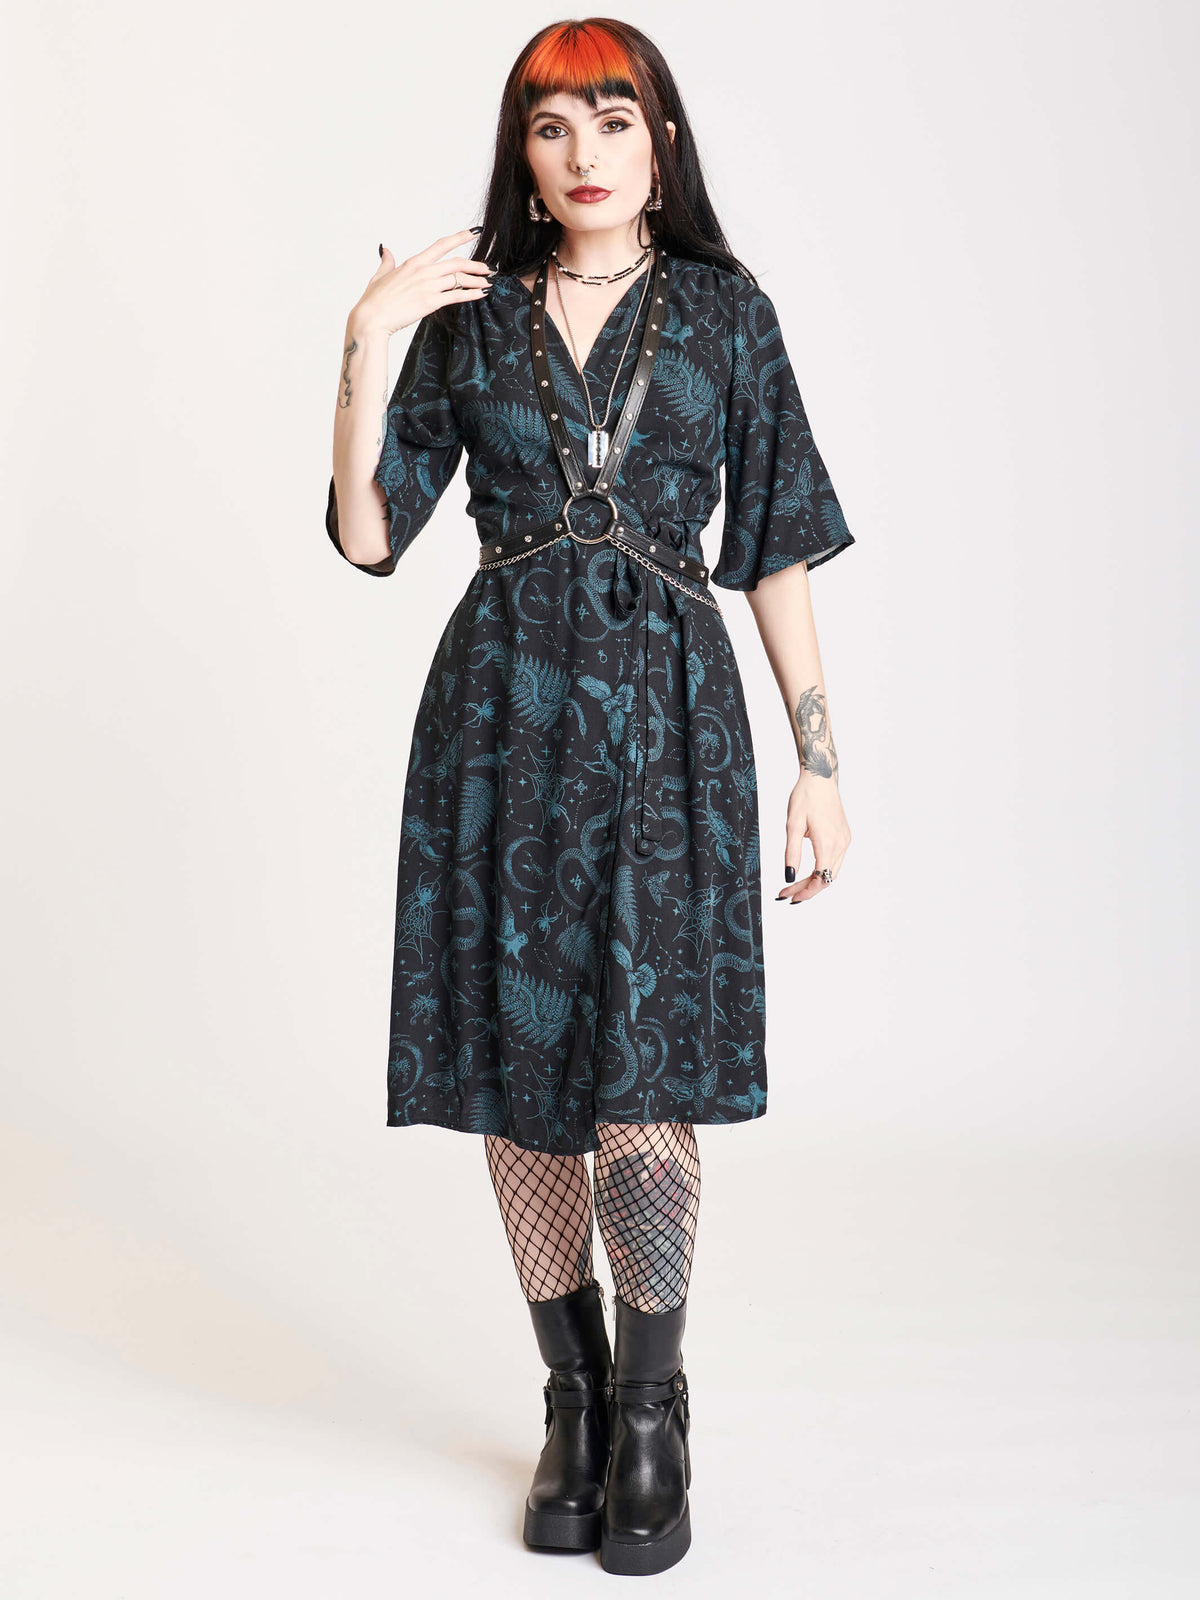 Wrap dress with black and green all over print